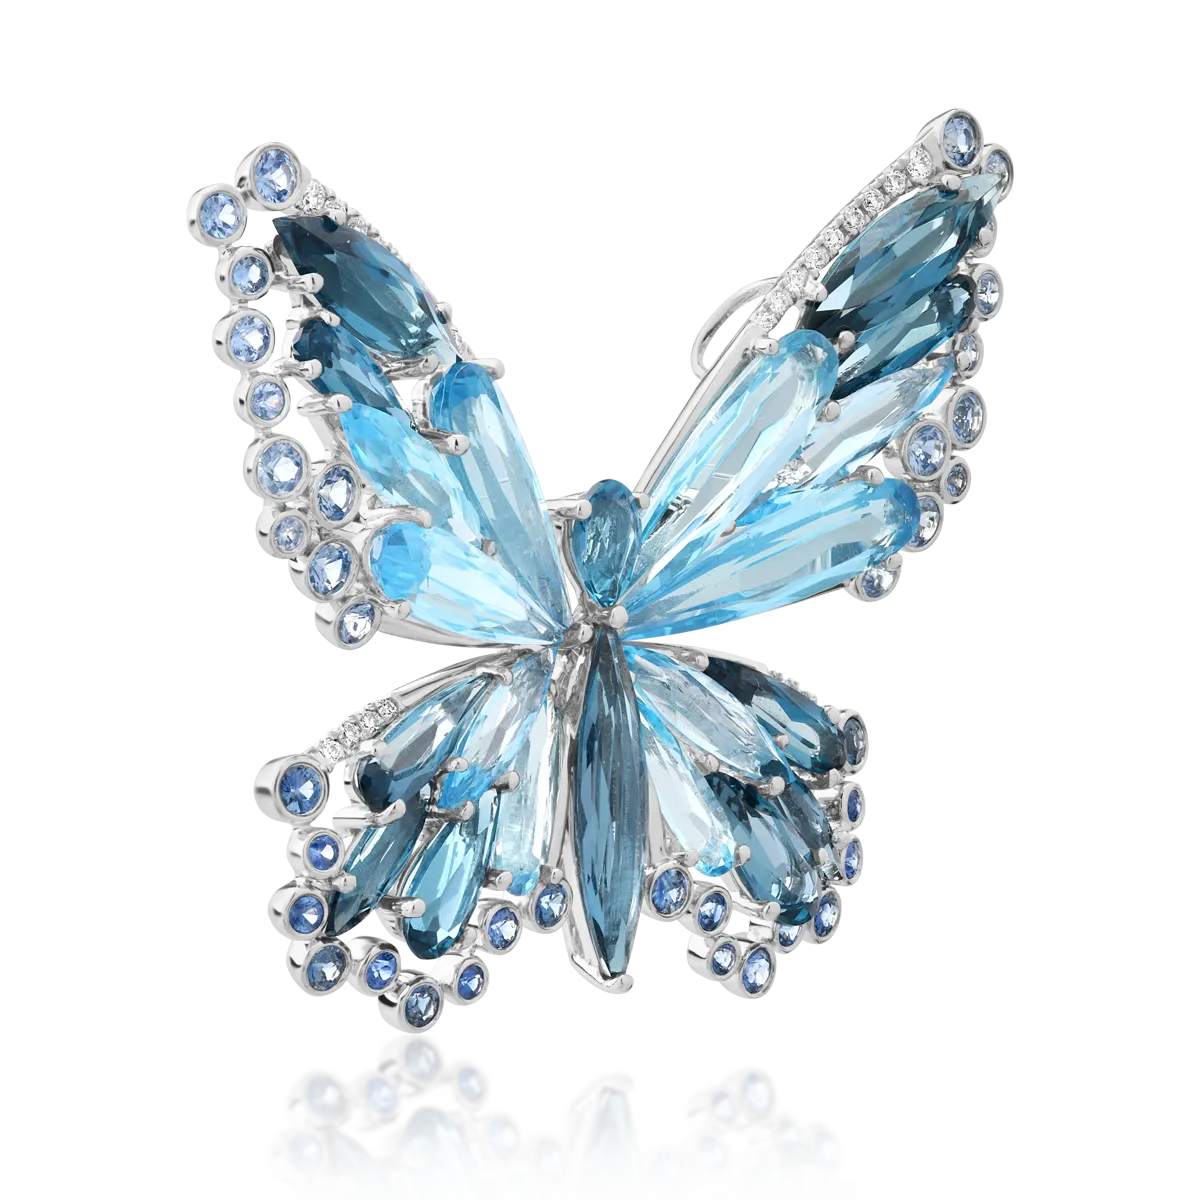 18K white gold brooch with 11.9ct blue topaz and 5.1ct london blue topaz